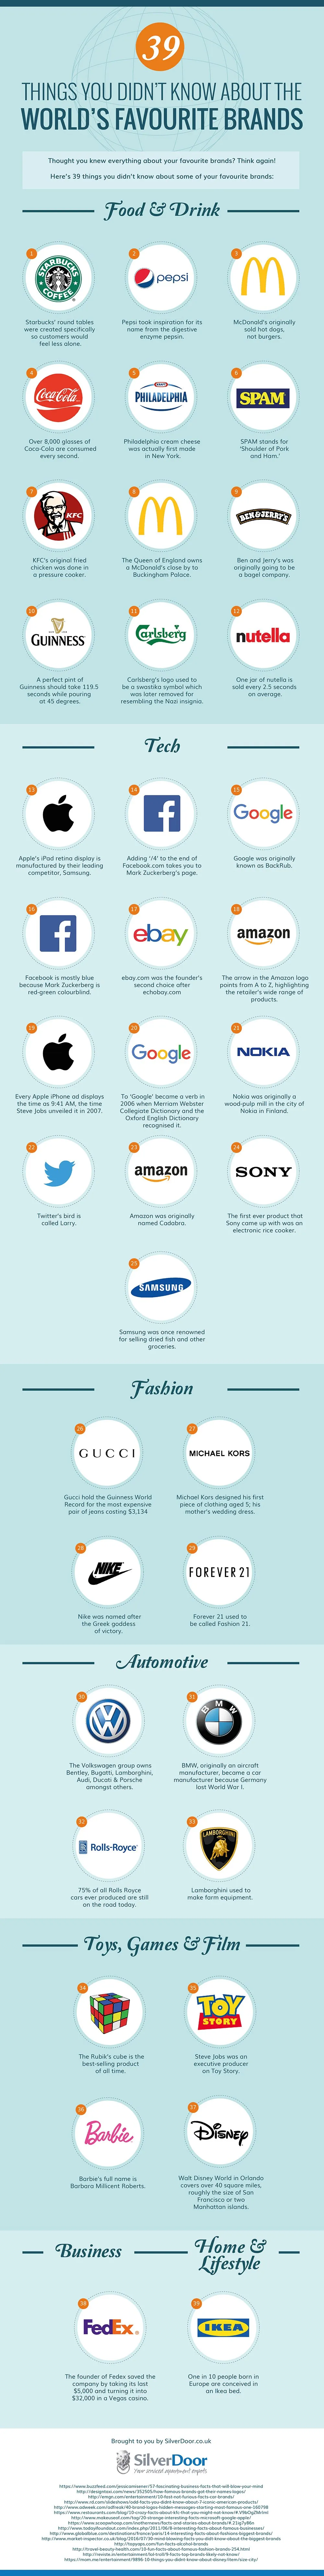 39 Things You Didn’t Know About The World’s Favourite Brands - #Infographic